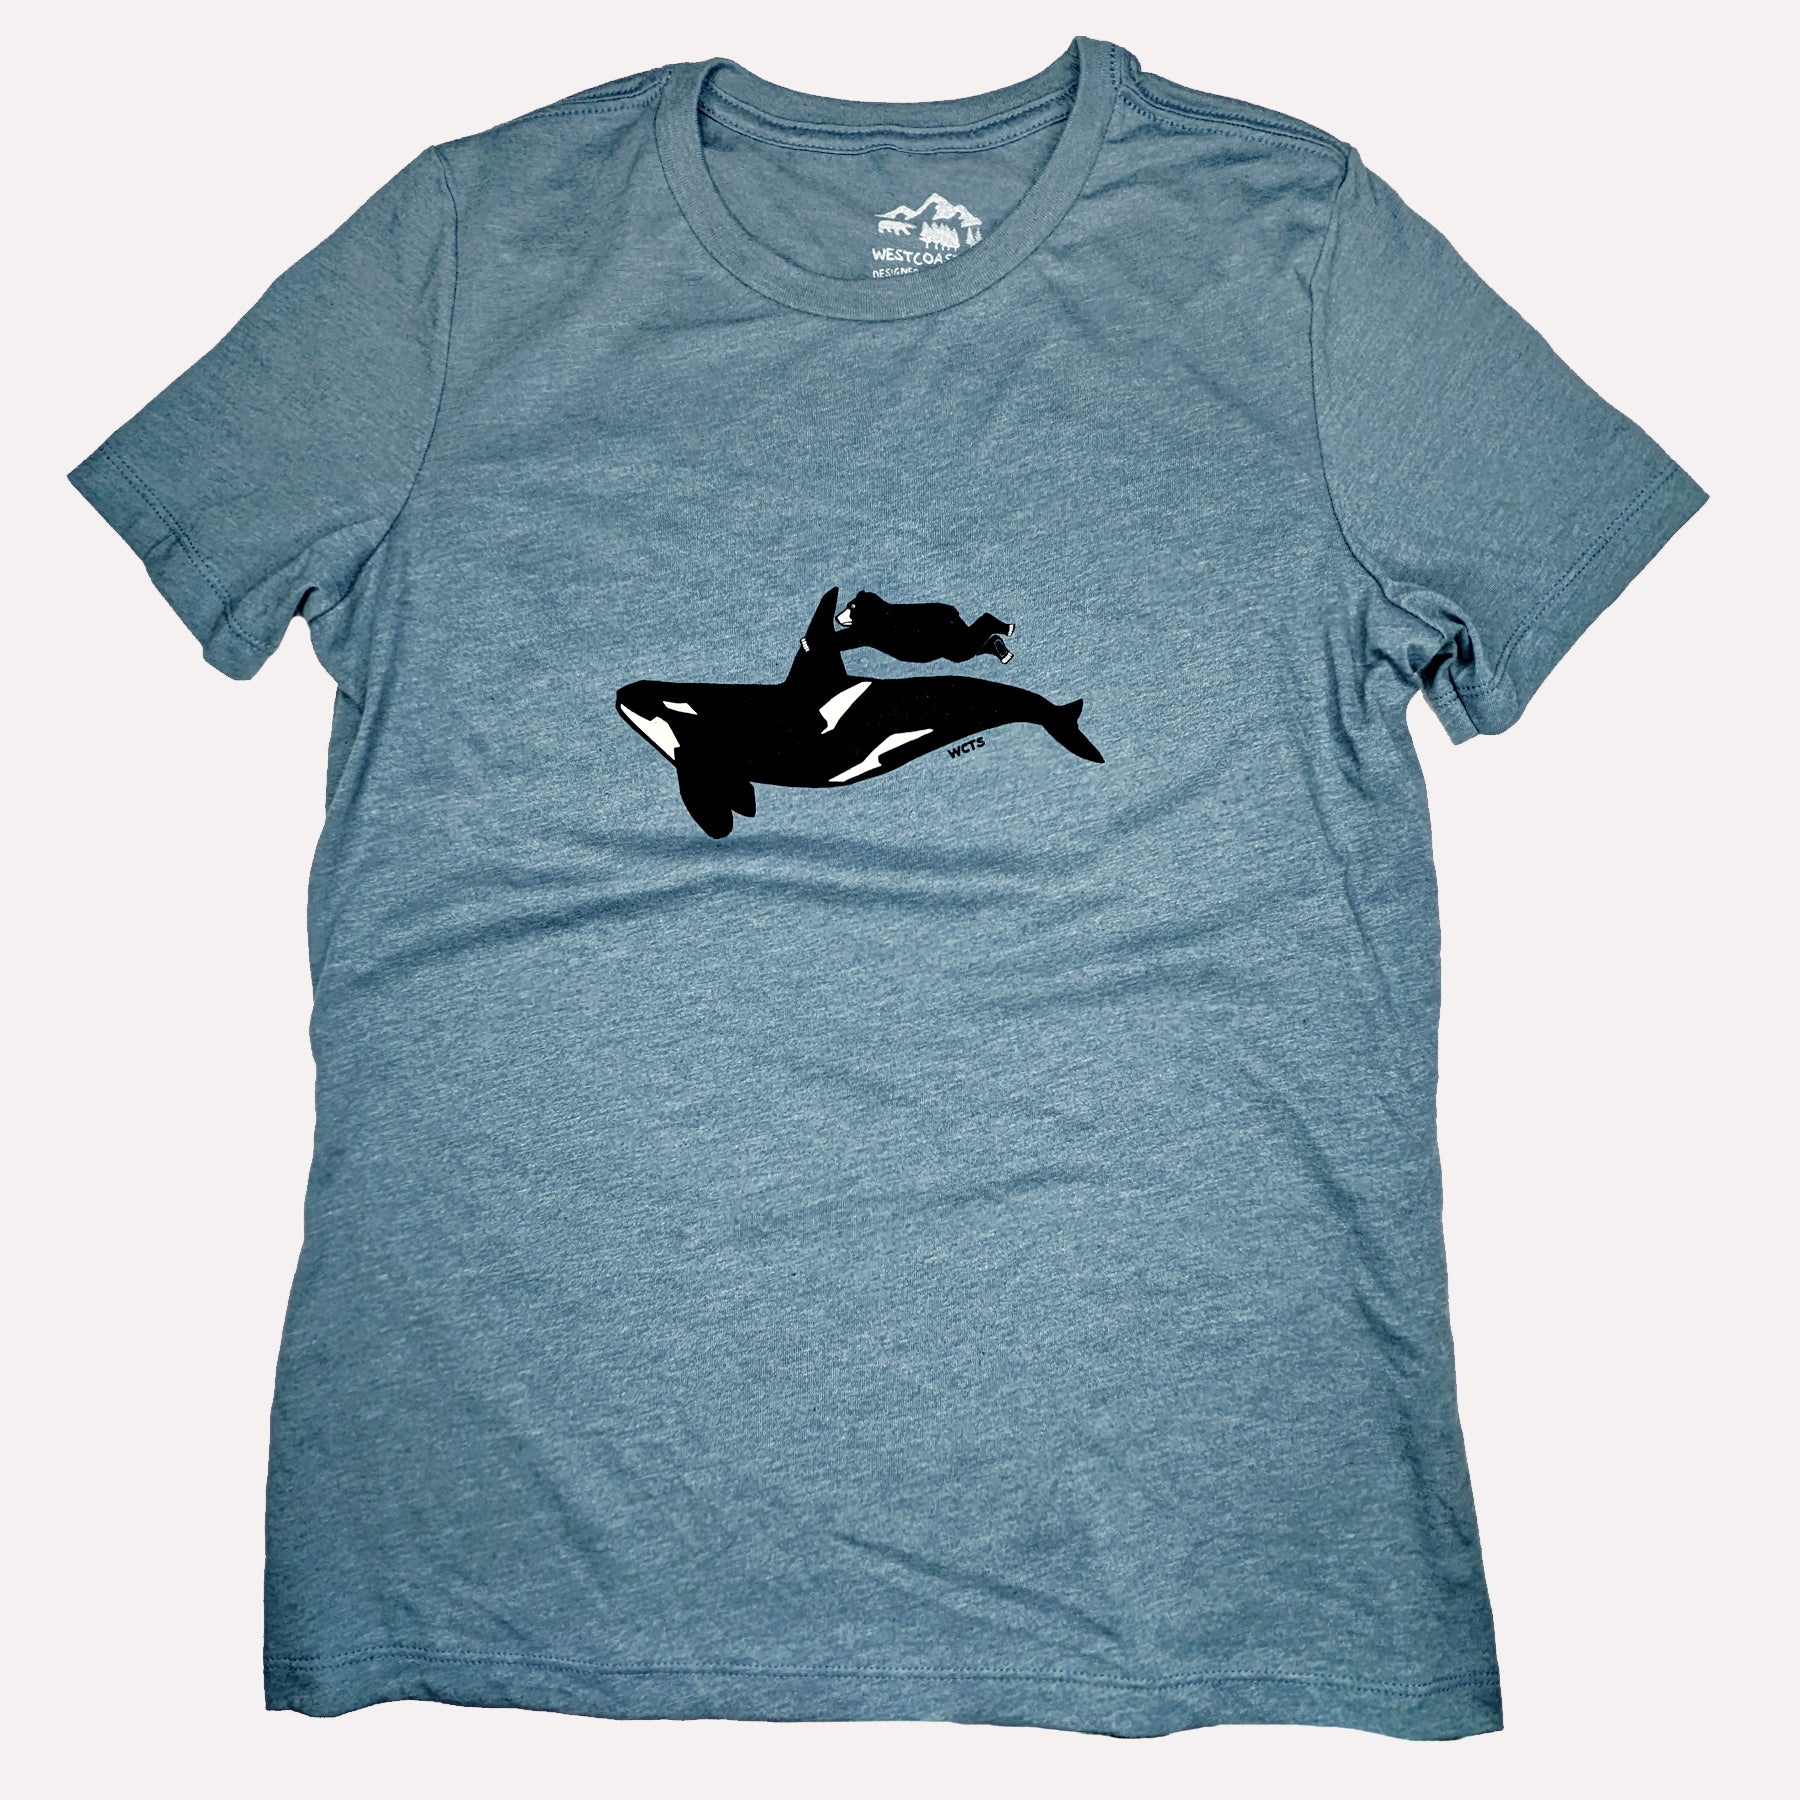 Westcoastees Adult Unisex Orca Ride Graphic Tee - Westcoastees Adult Unisex Orca Ride Graphic Tee -  - House of Himwitsa Native Art Gallery and Gifts